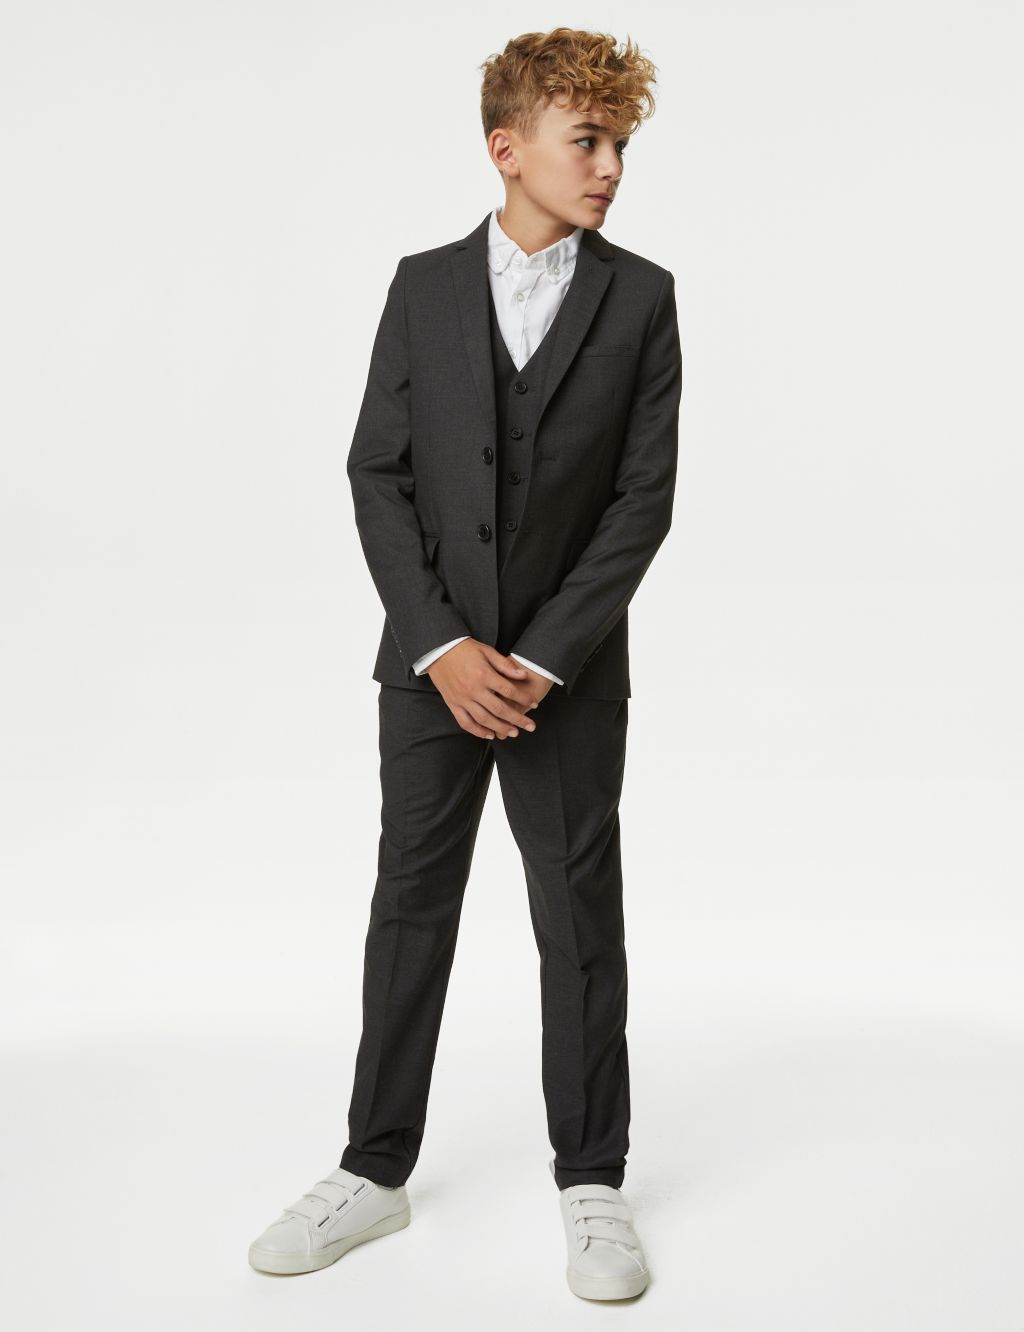 Jacket, Trouser & Waistcoat Outfit image 1